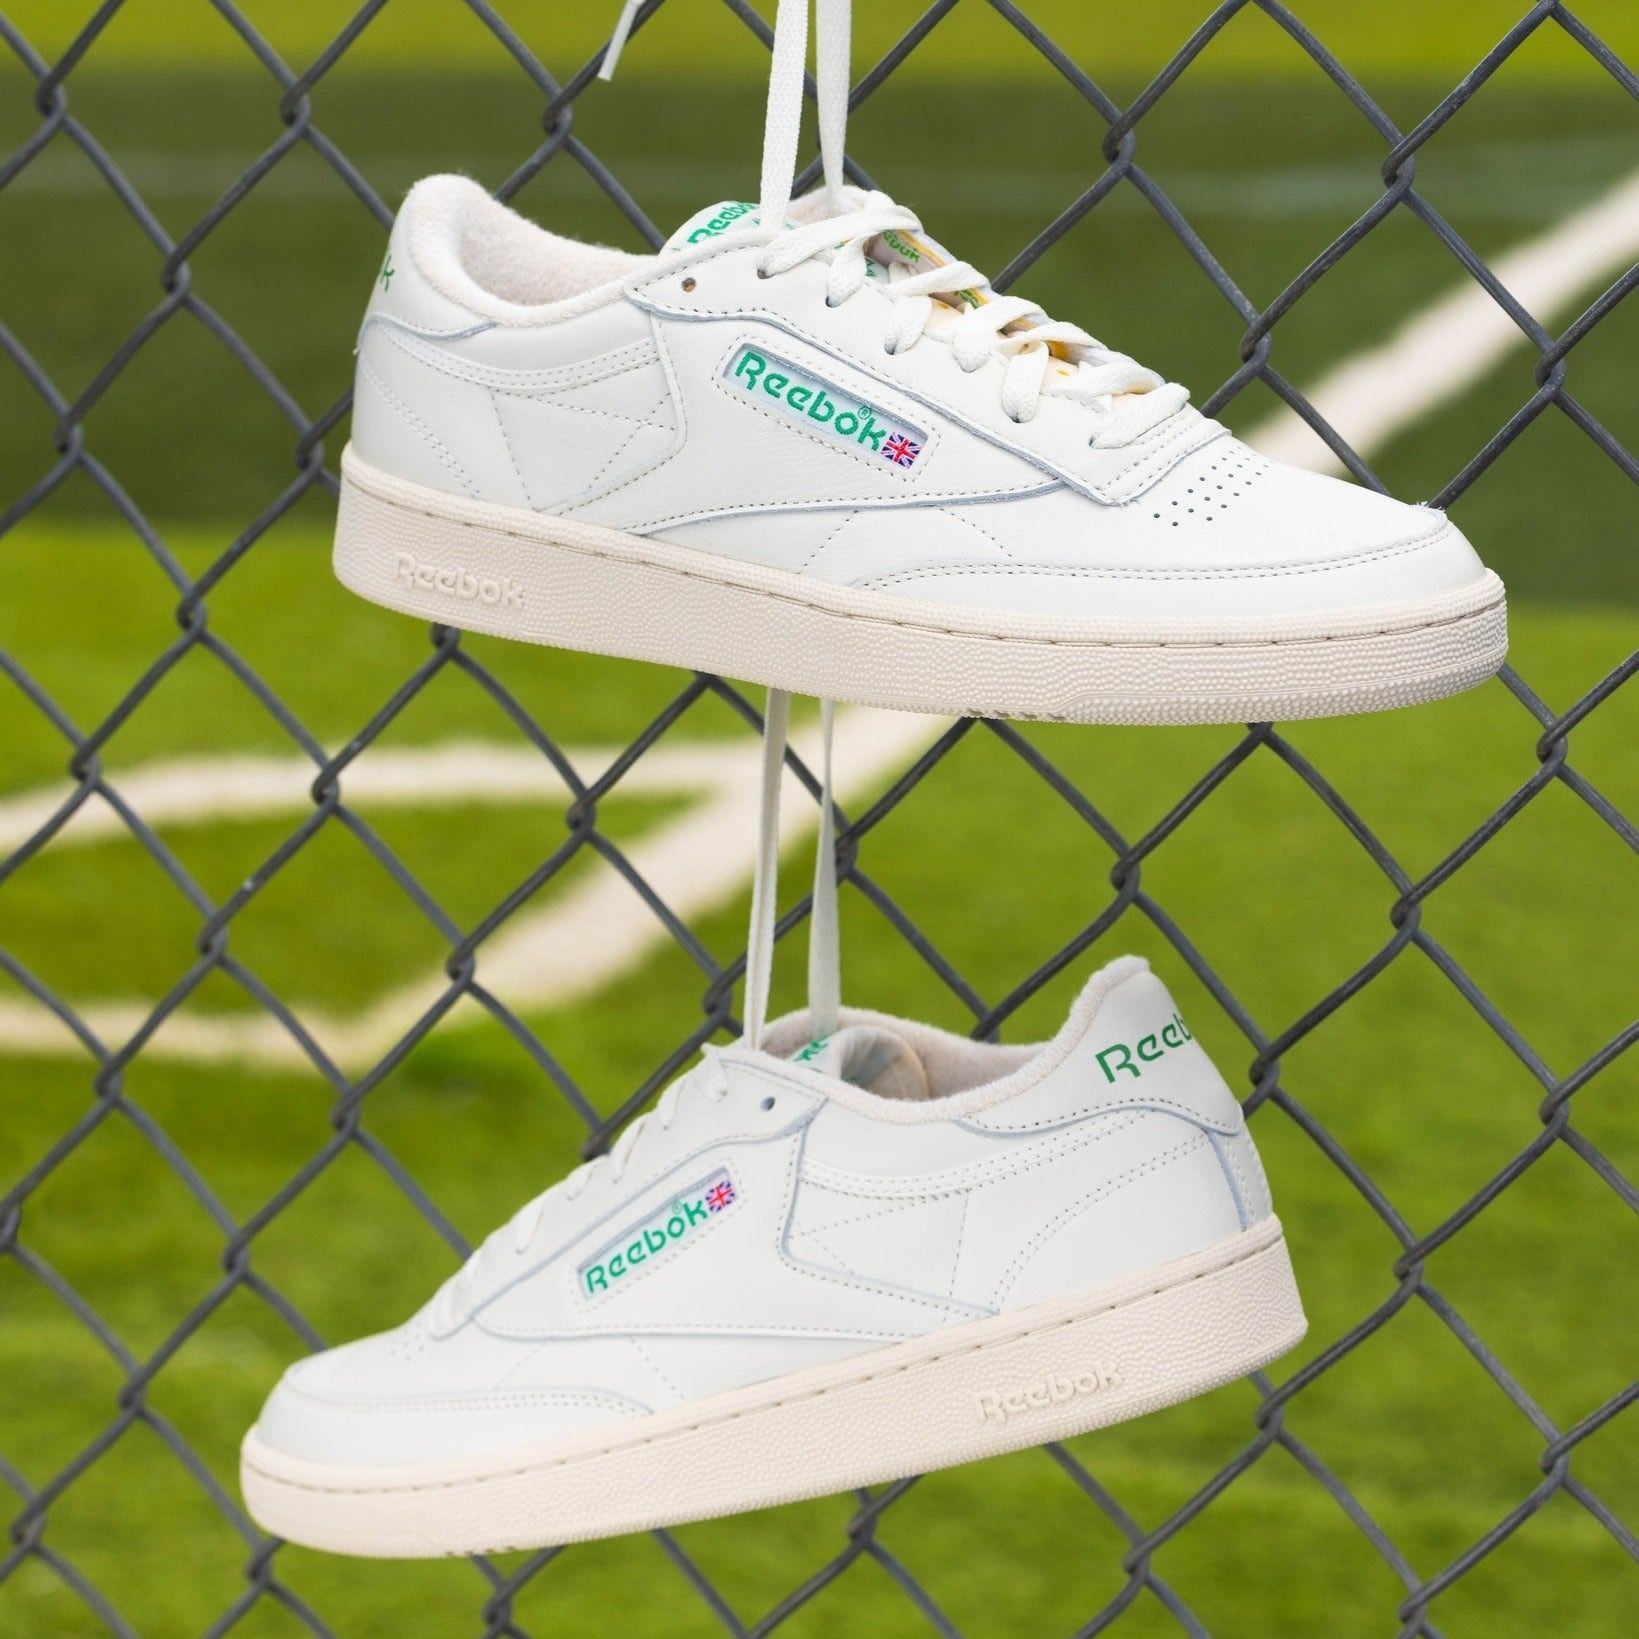 Side view of white and green Reebok tennis shoes.